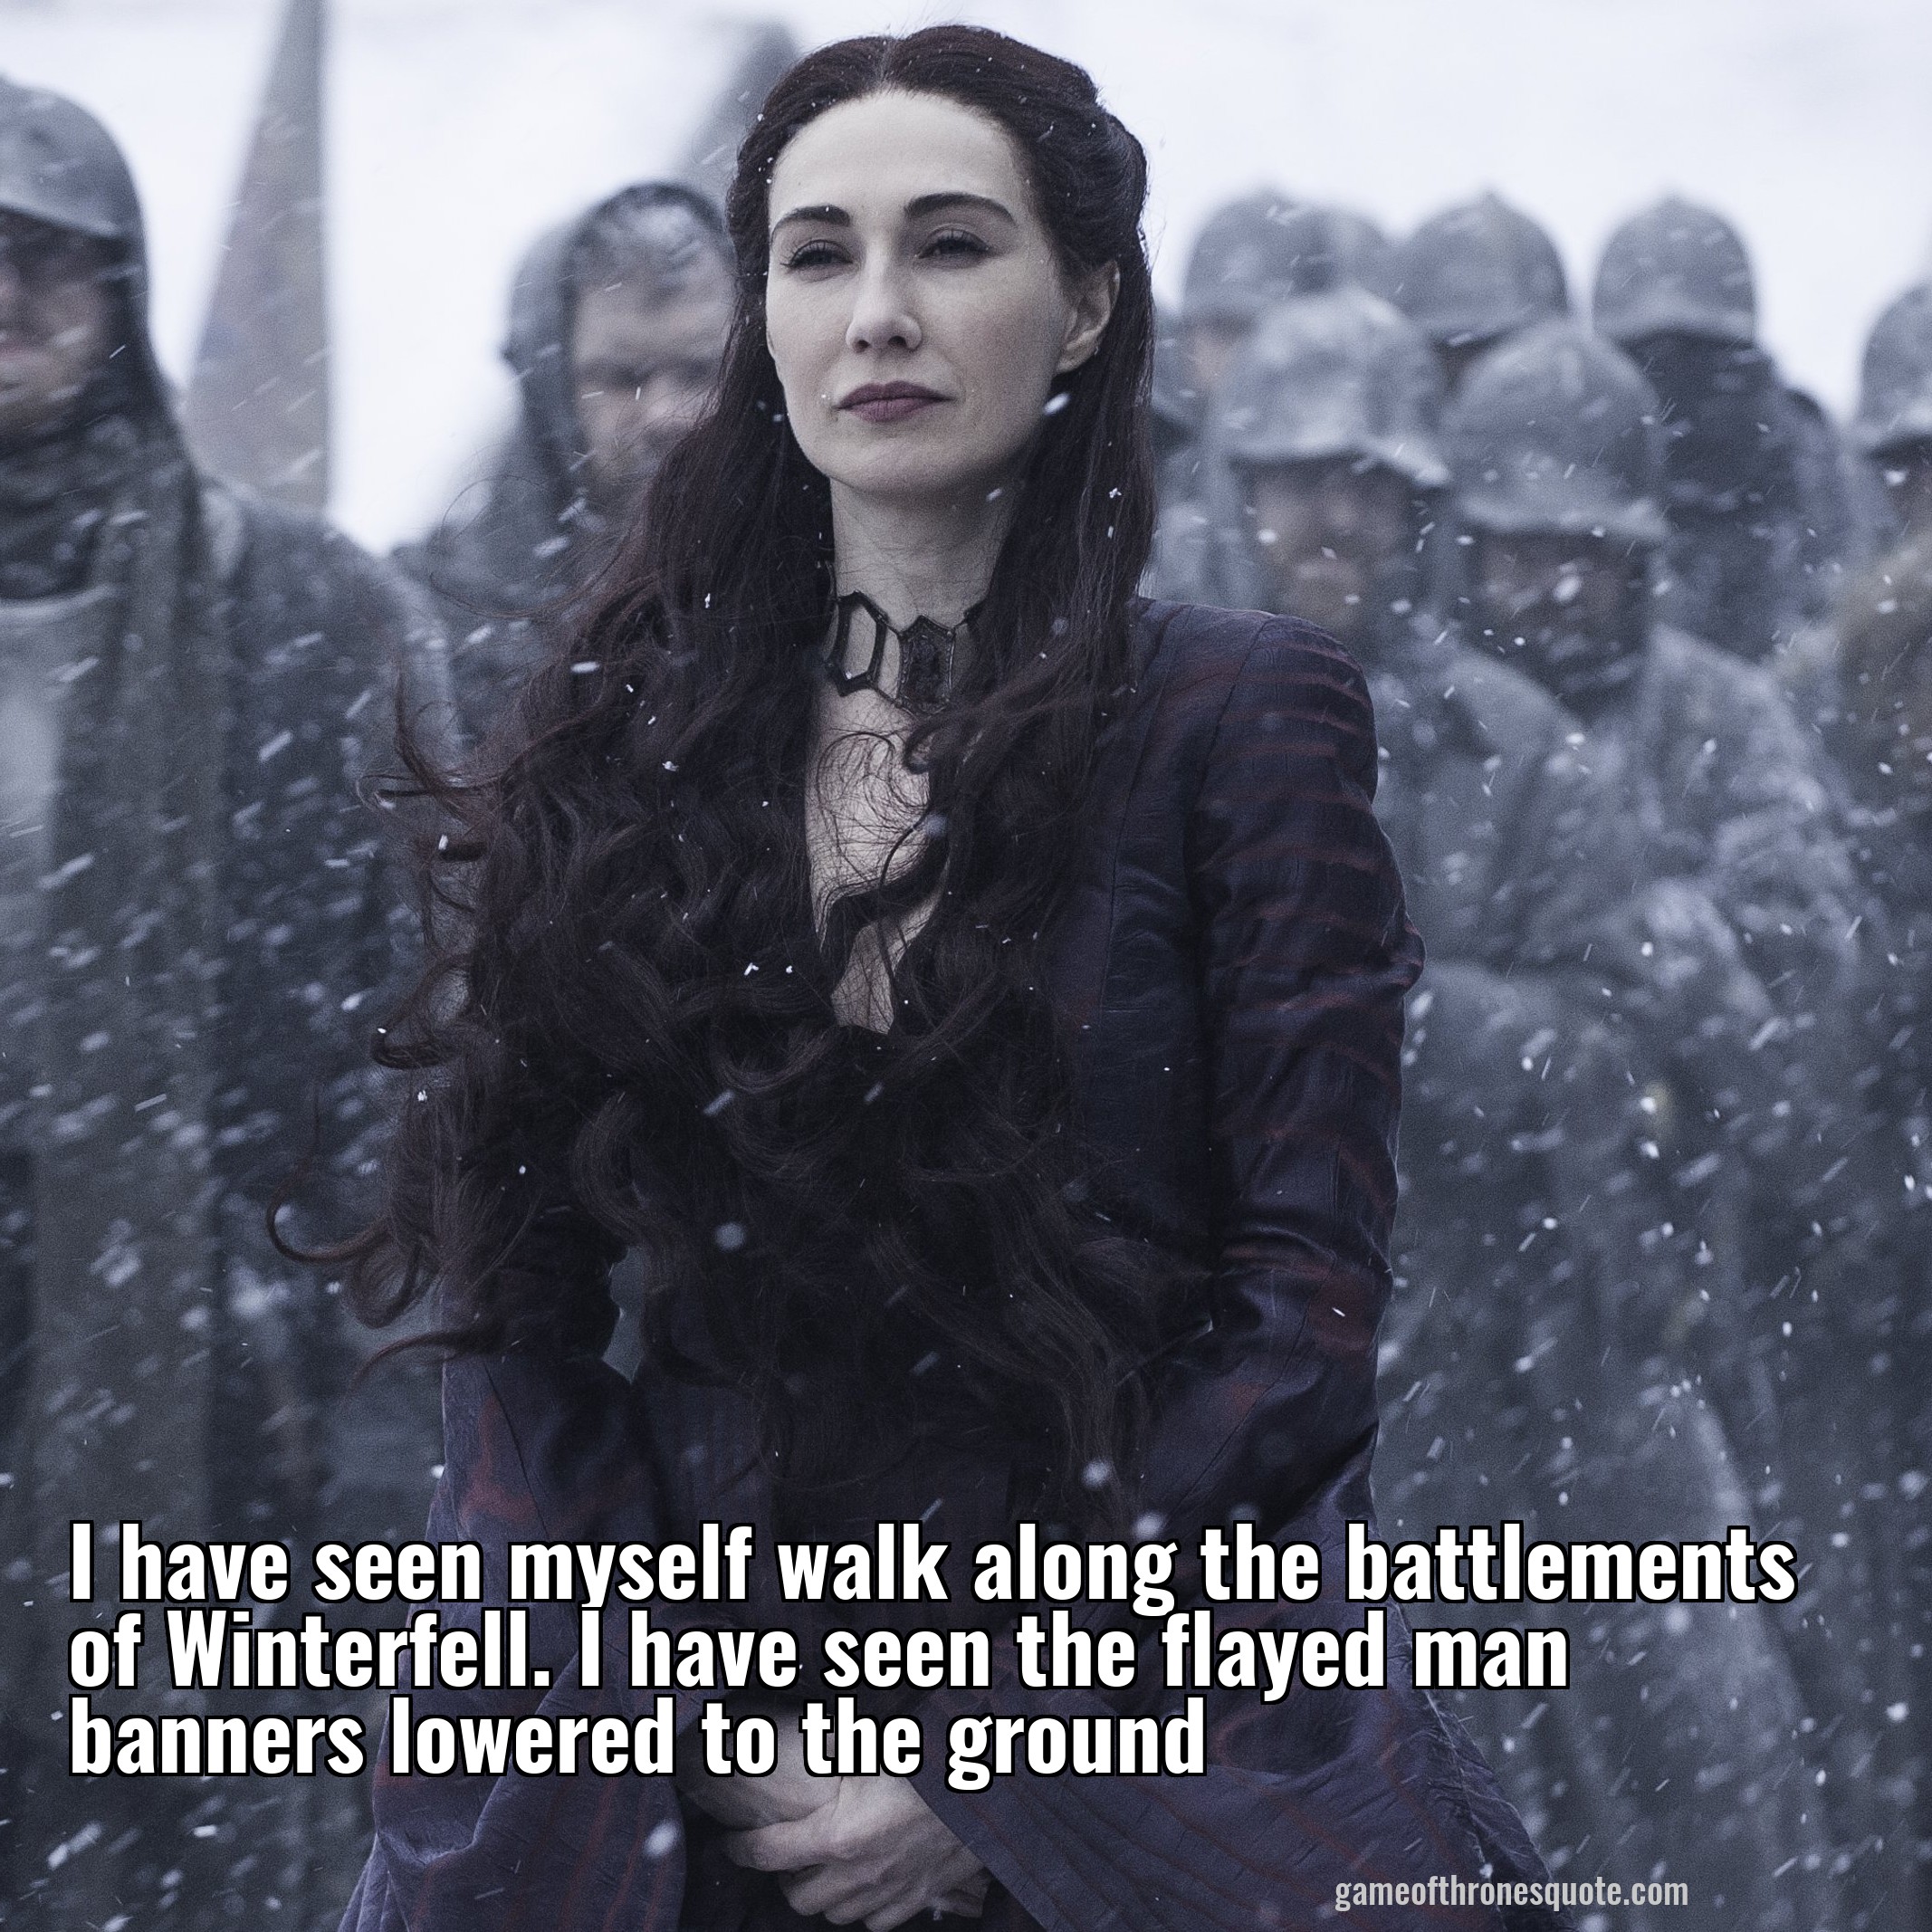 I have seen myself walk along the battlements of Winterfell. I have seen the flayed man banners lowered to the ground